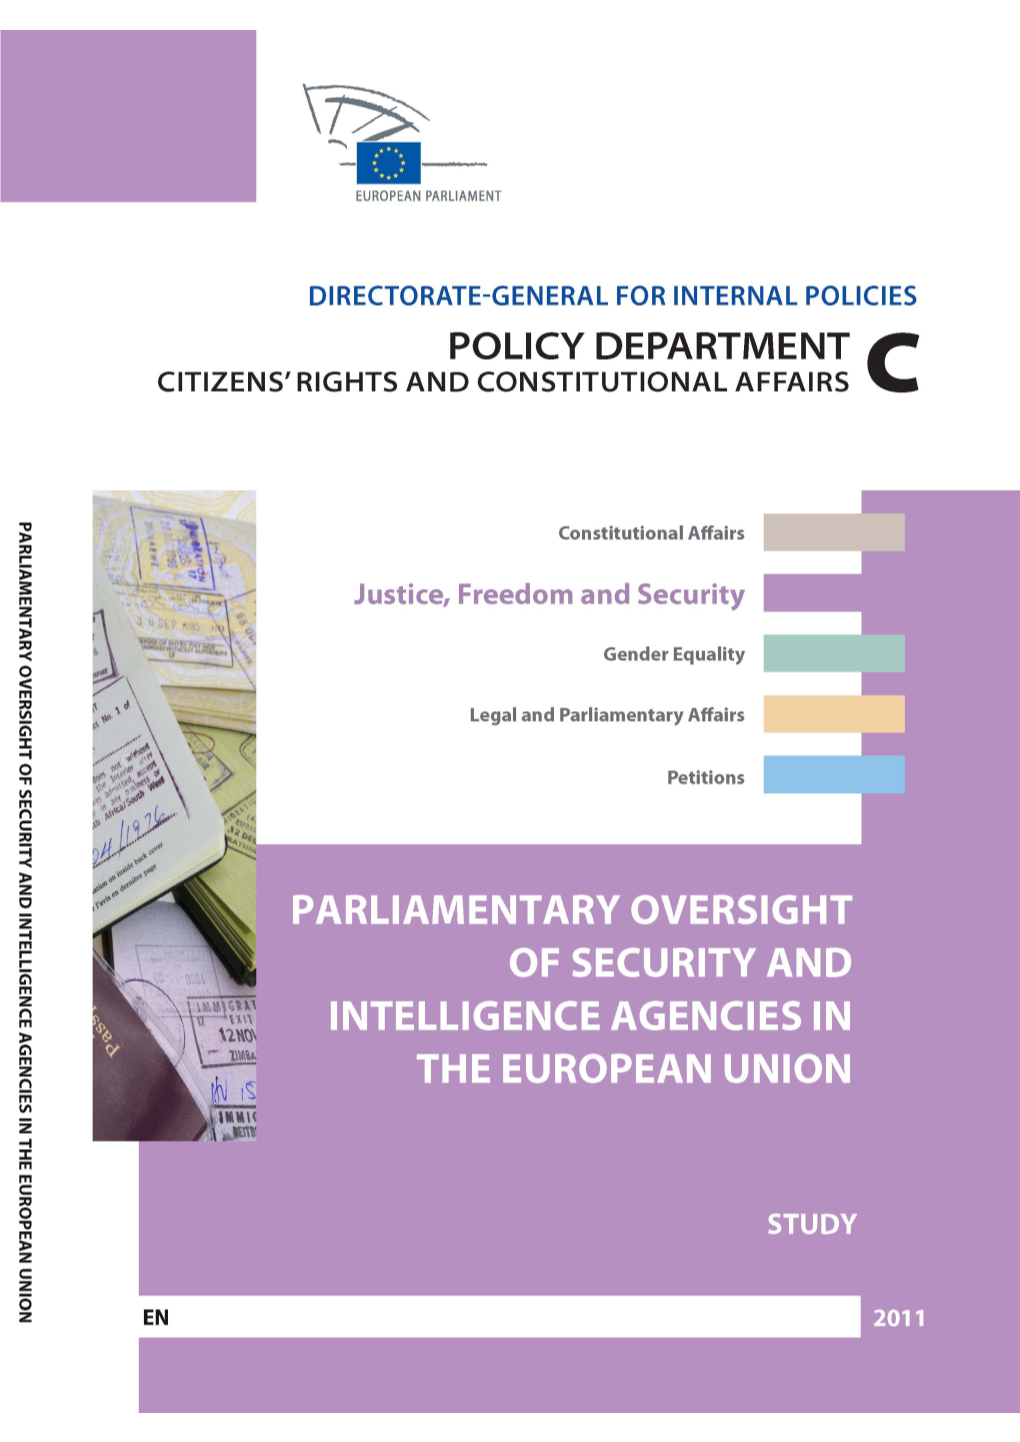 Parliamentary Oversight of Security and Intelligence Agencies in the European Union